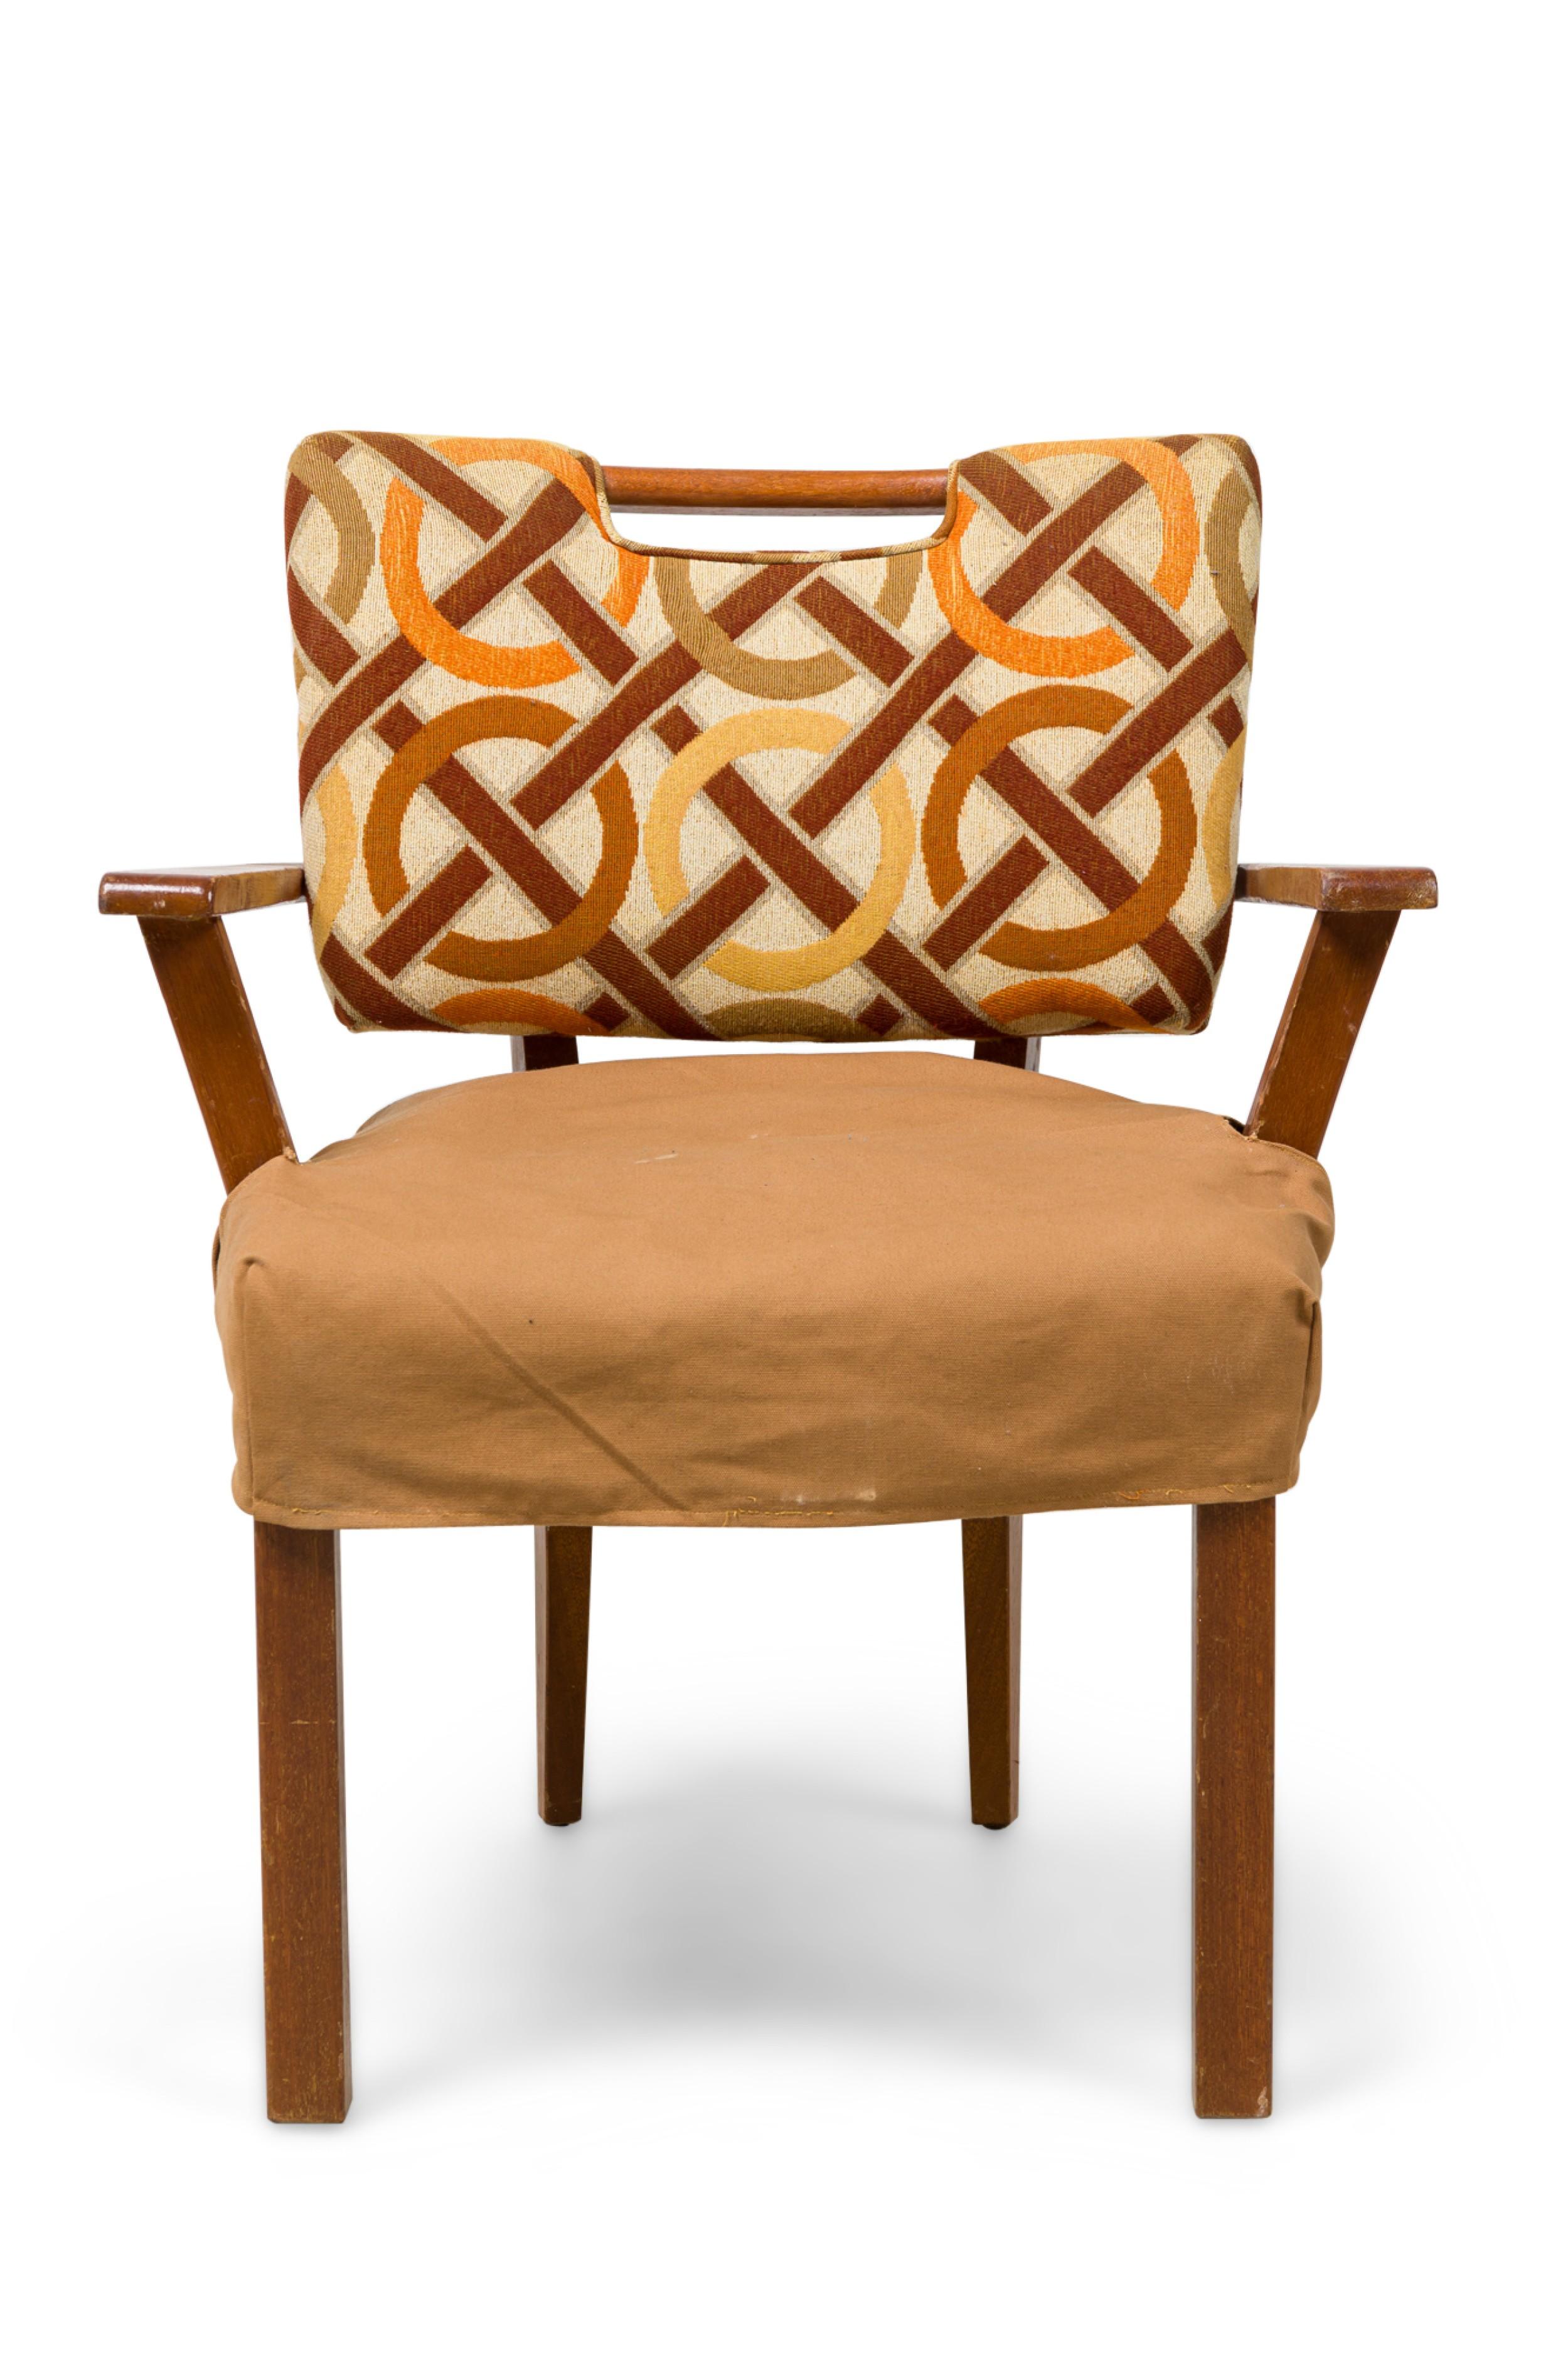 PAIR of Mid-Century (1950s) American armchairs with flat right-angled arms, padded backs upholstered in a brown tone geometric patterned fabric, seat wrapped in light brown canvas fitted & buttoned covers, the back legs tapered and slightly splayed.